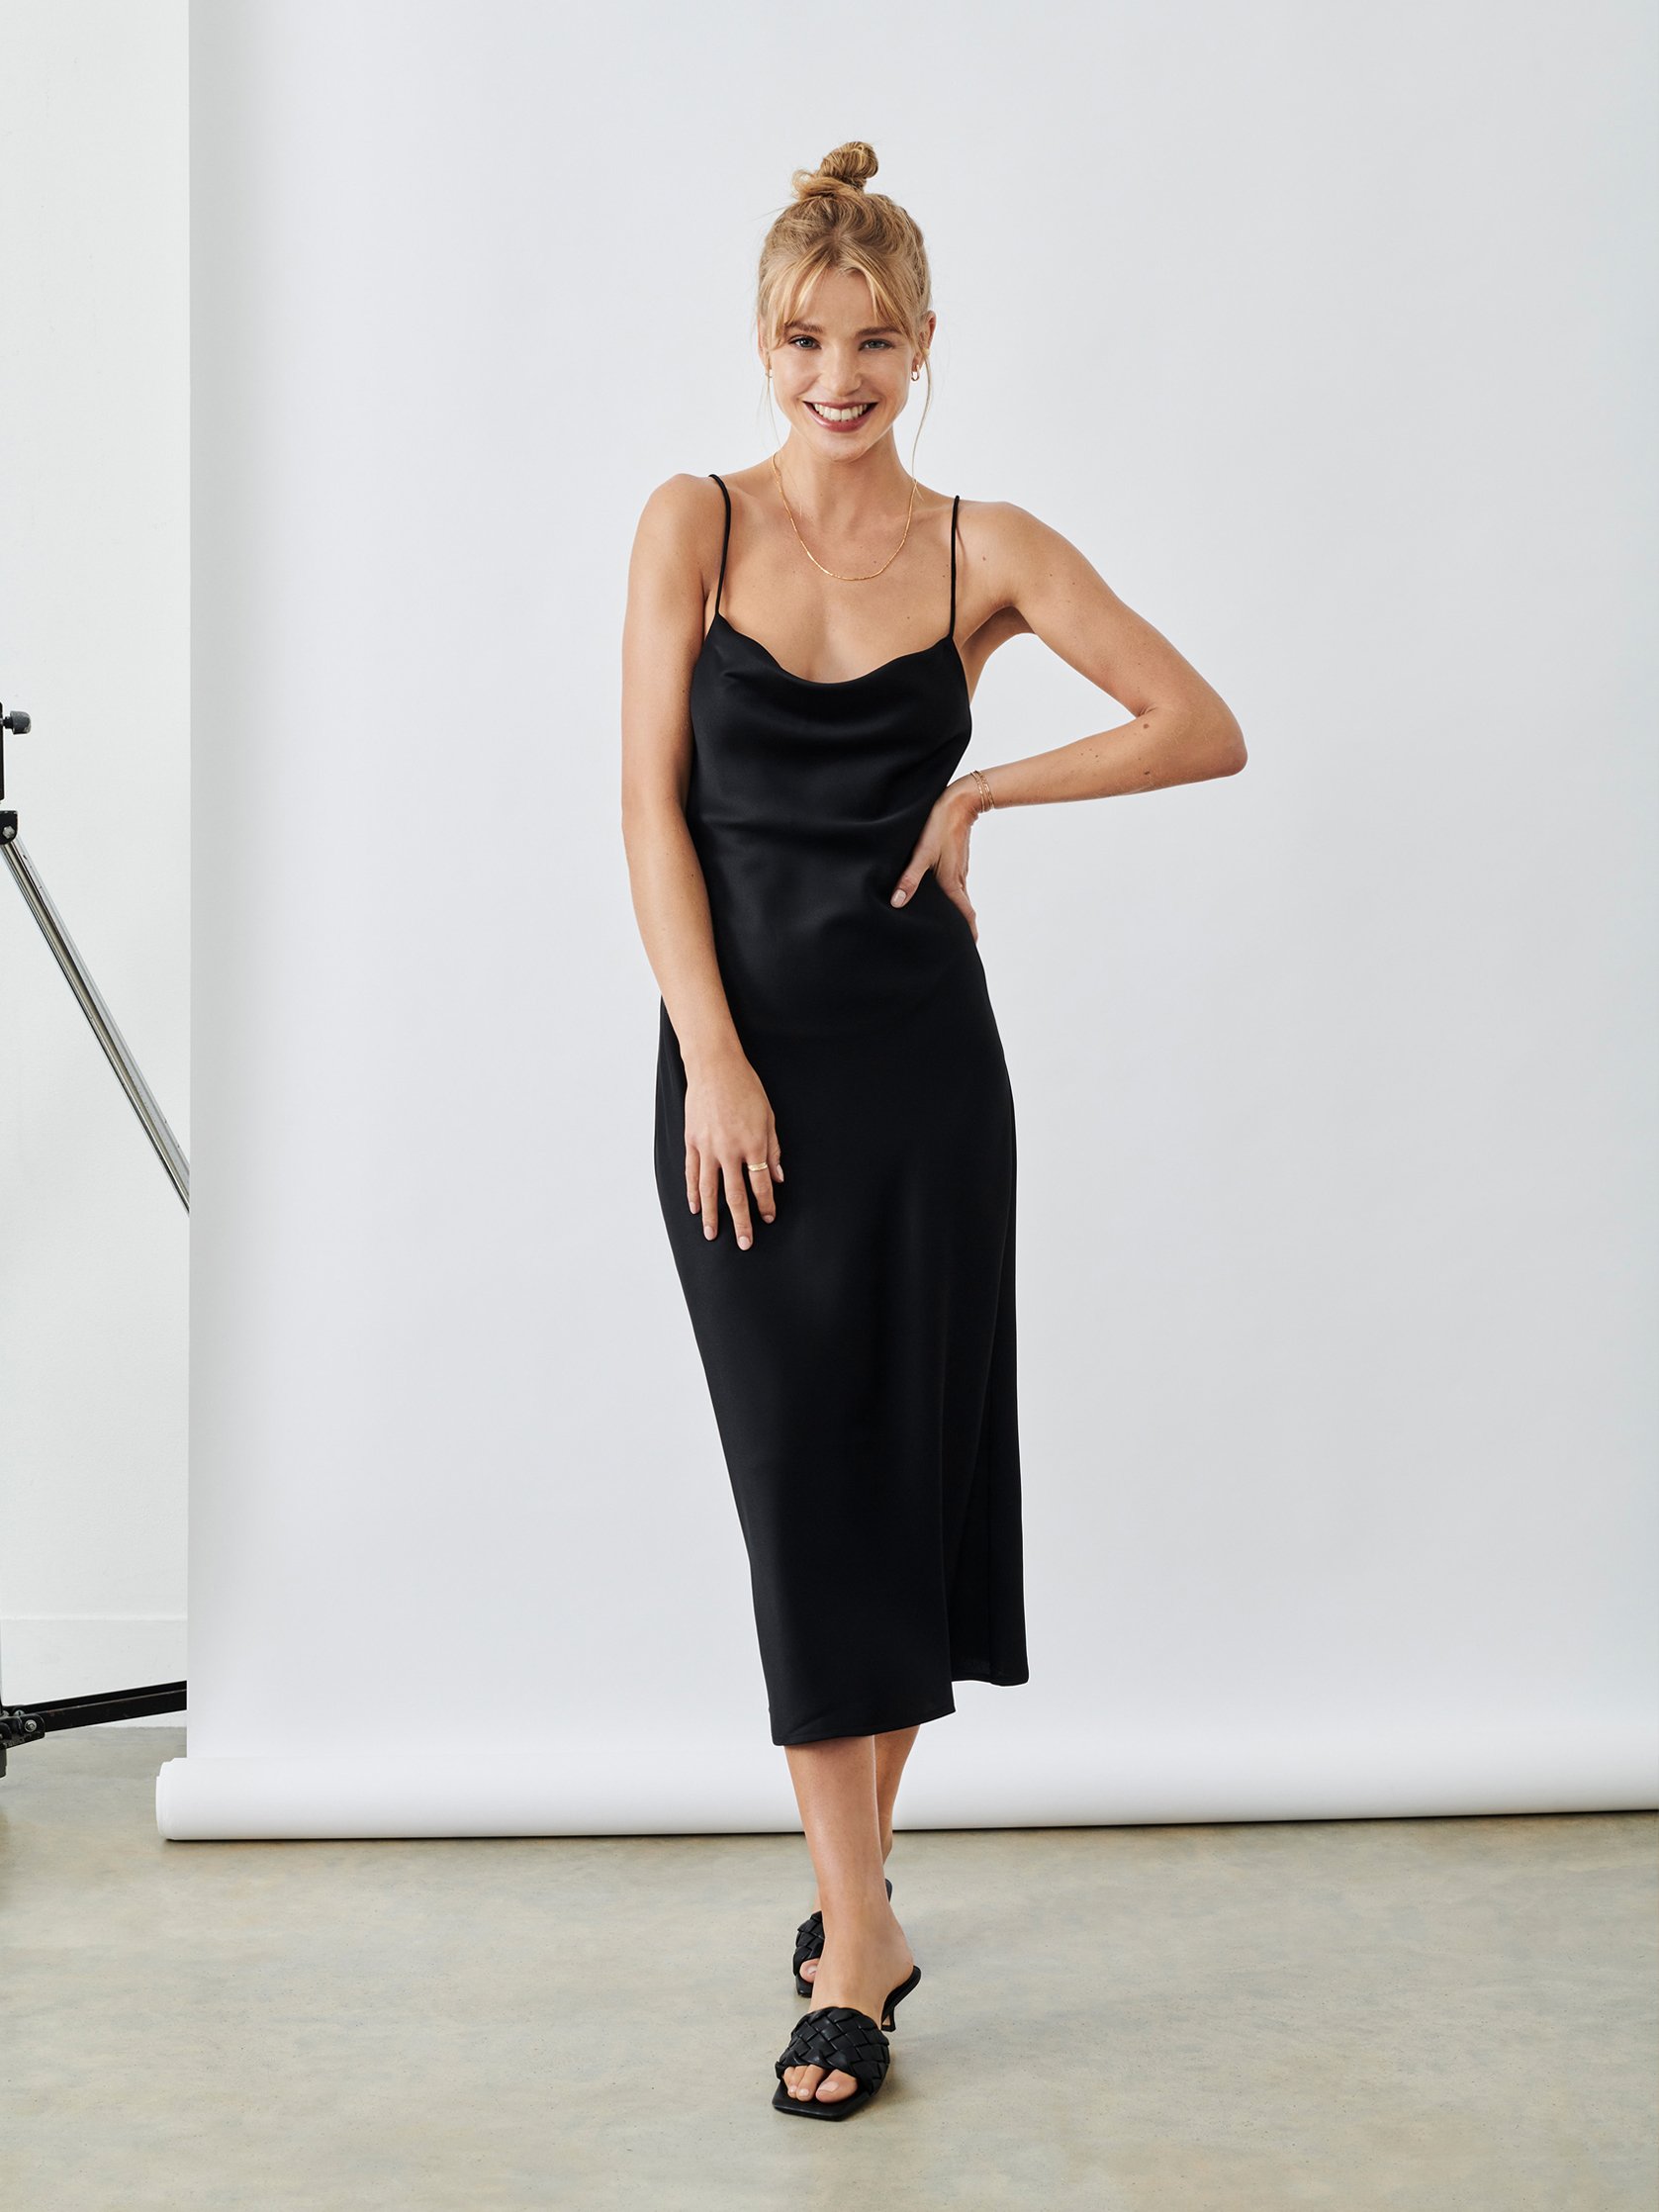 27 Tight Black Dresses Your Wardrobe Is Crying Out For | Who What Wear UK